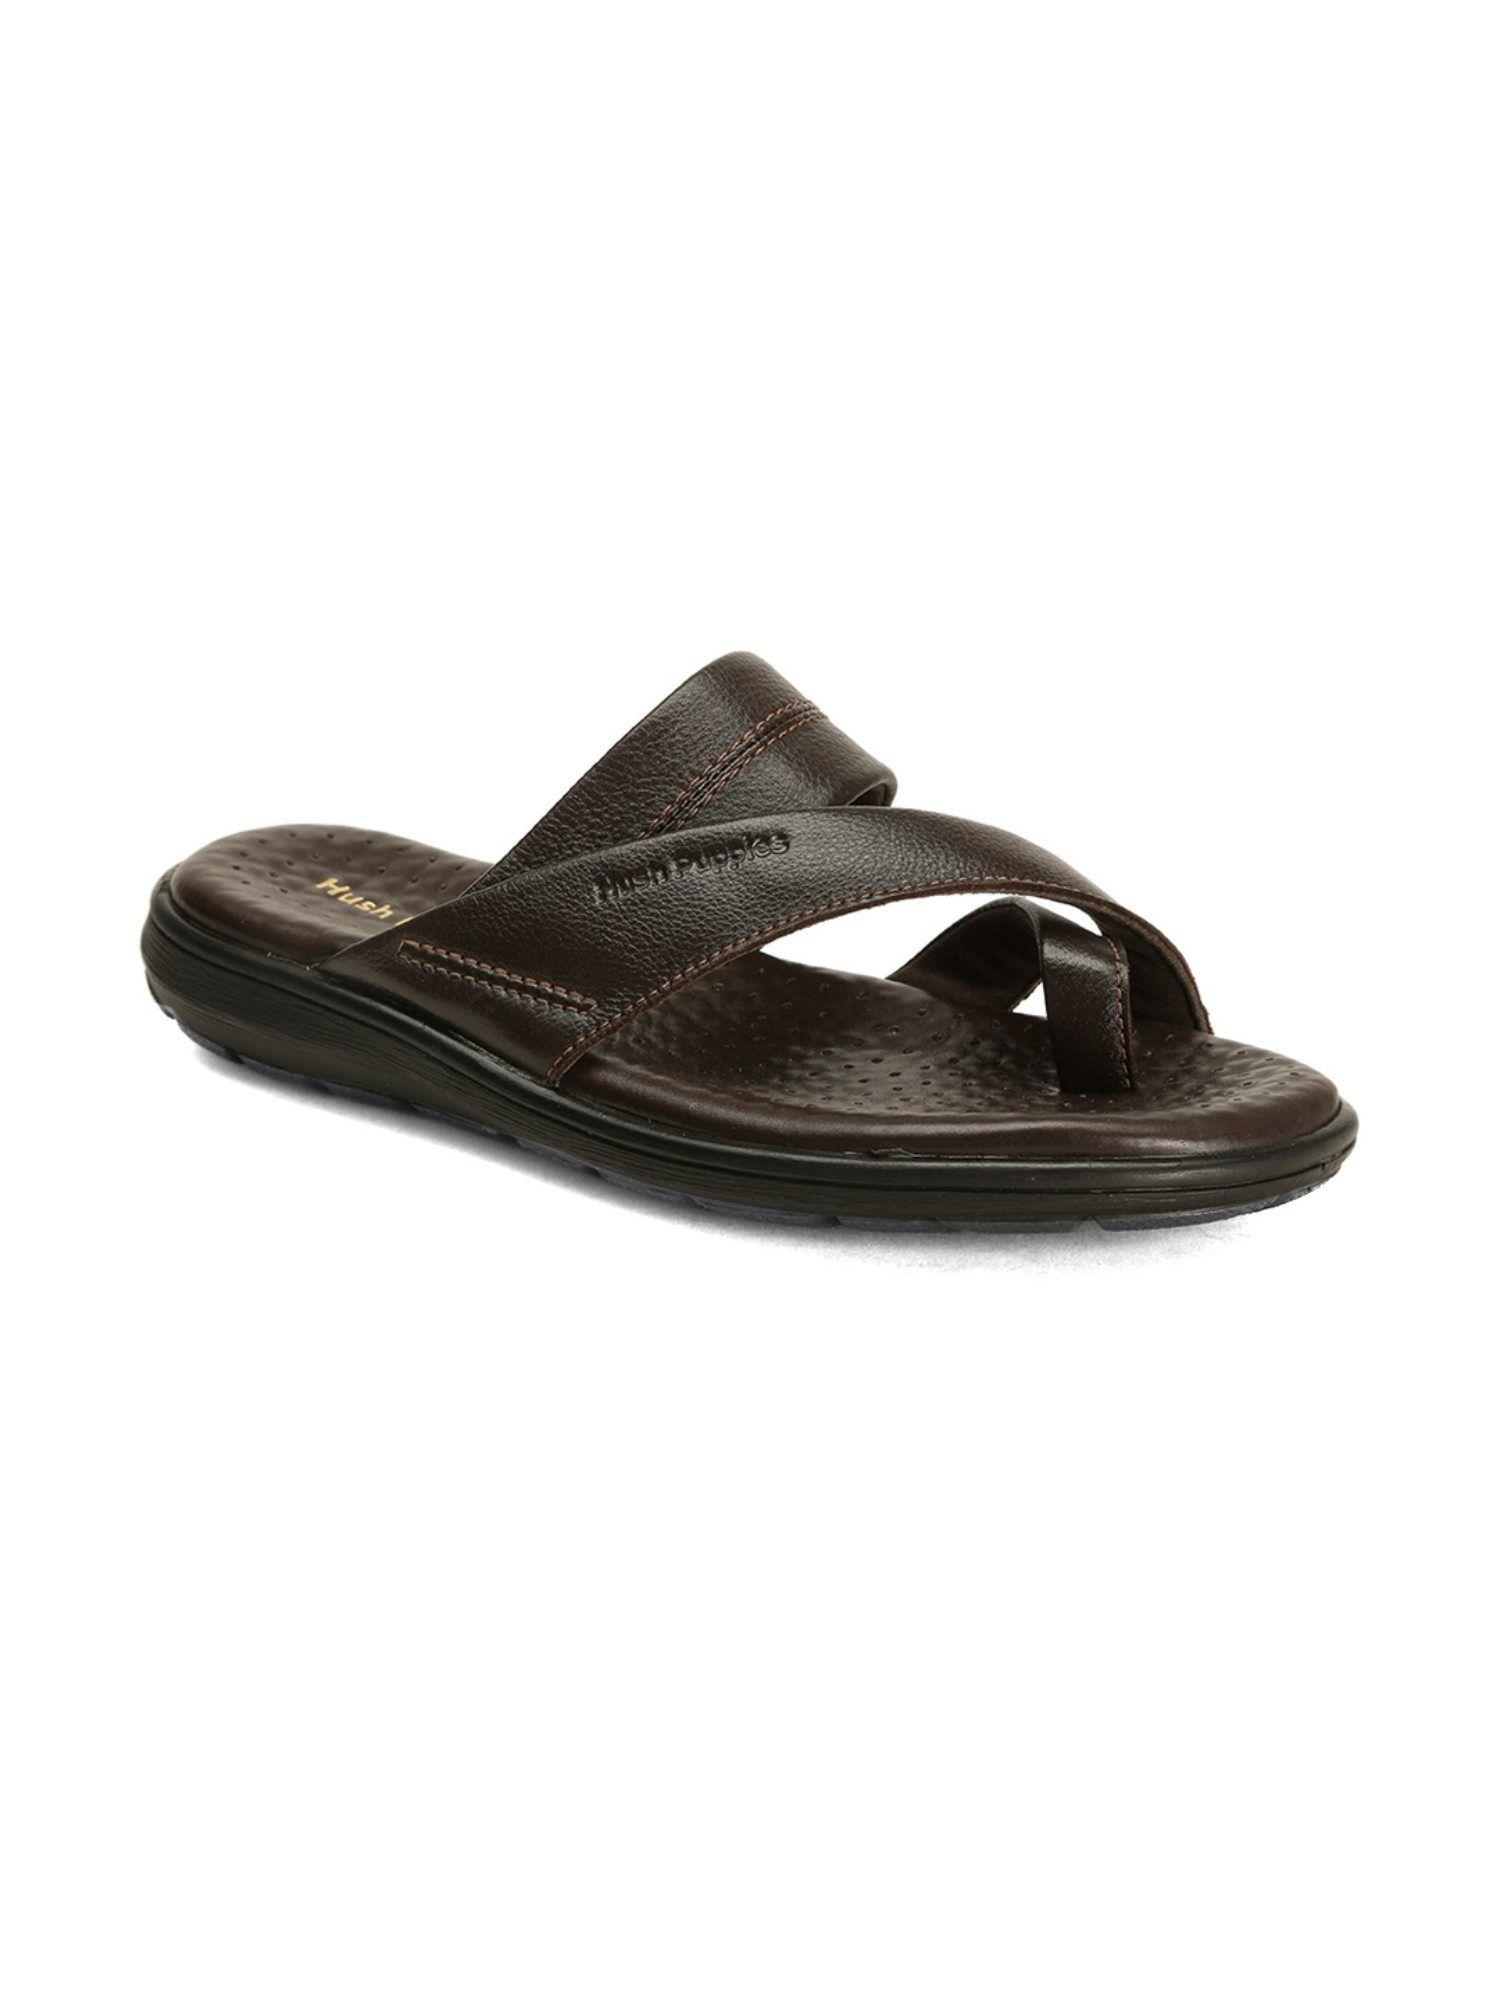 Solid Brown Sandals